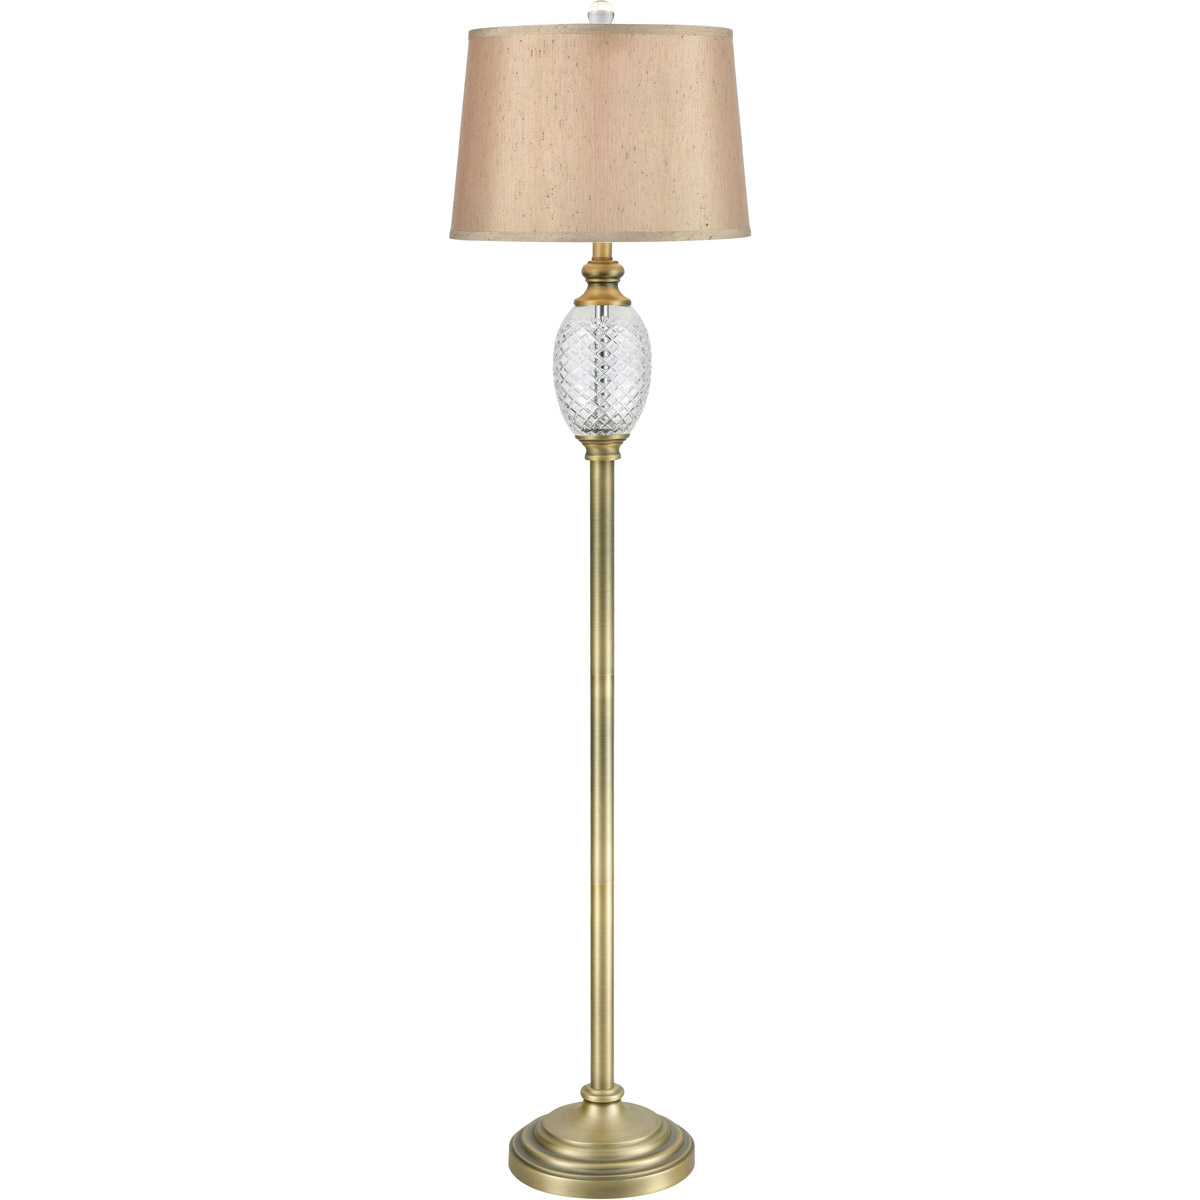 Details About Dale Tiffany Sgf17179 Brass Pineapple Floor Lamp Antique Nickel throughout measurements 1200 X 1200